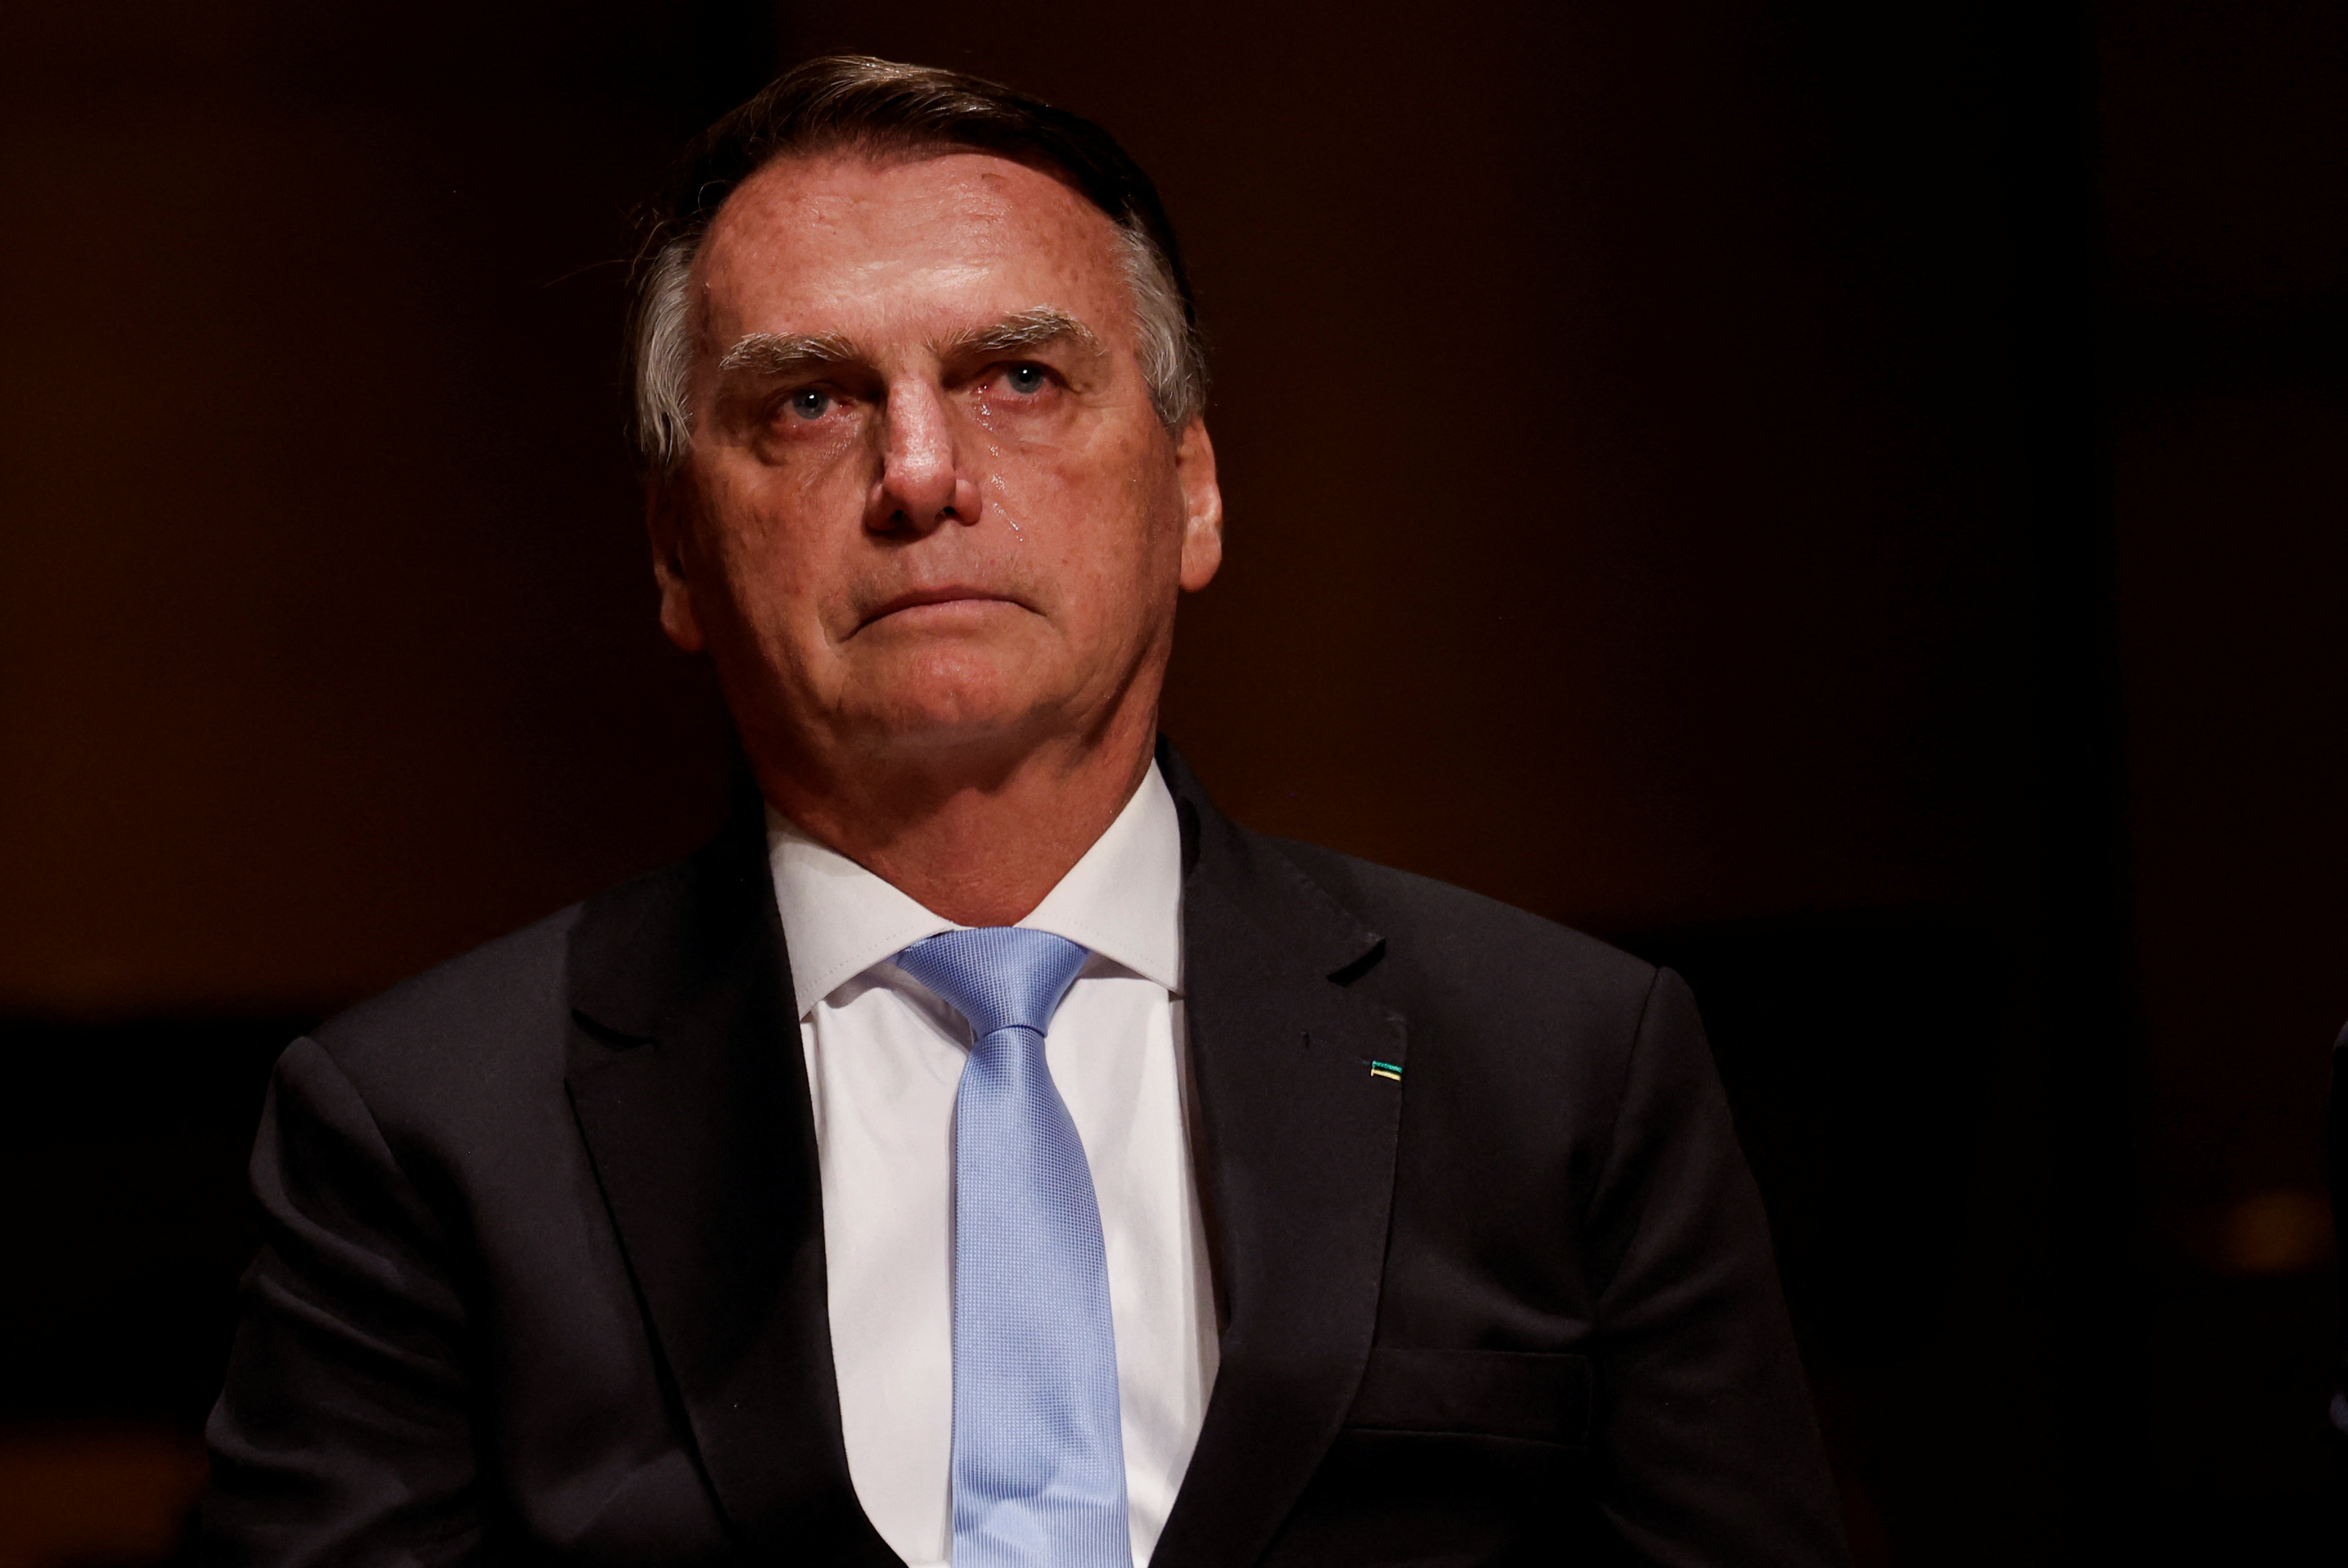 Brazil's former President Jair Bolsonaro attends an event at the Municipal Theatre in Sao Paulo